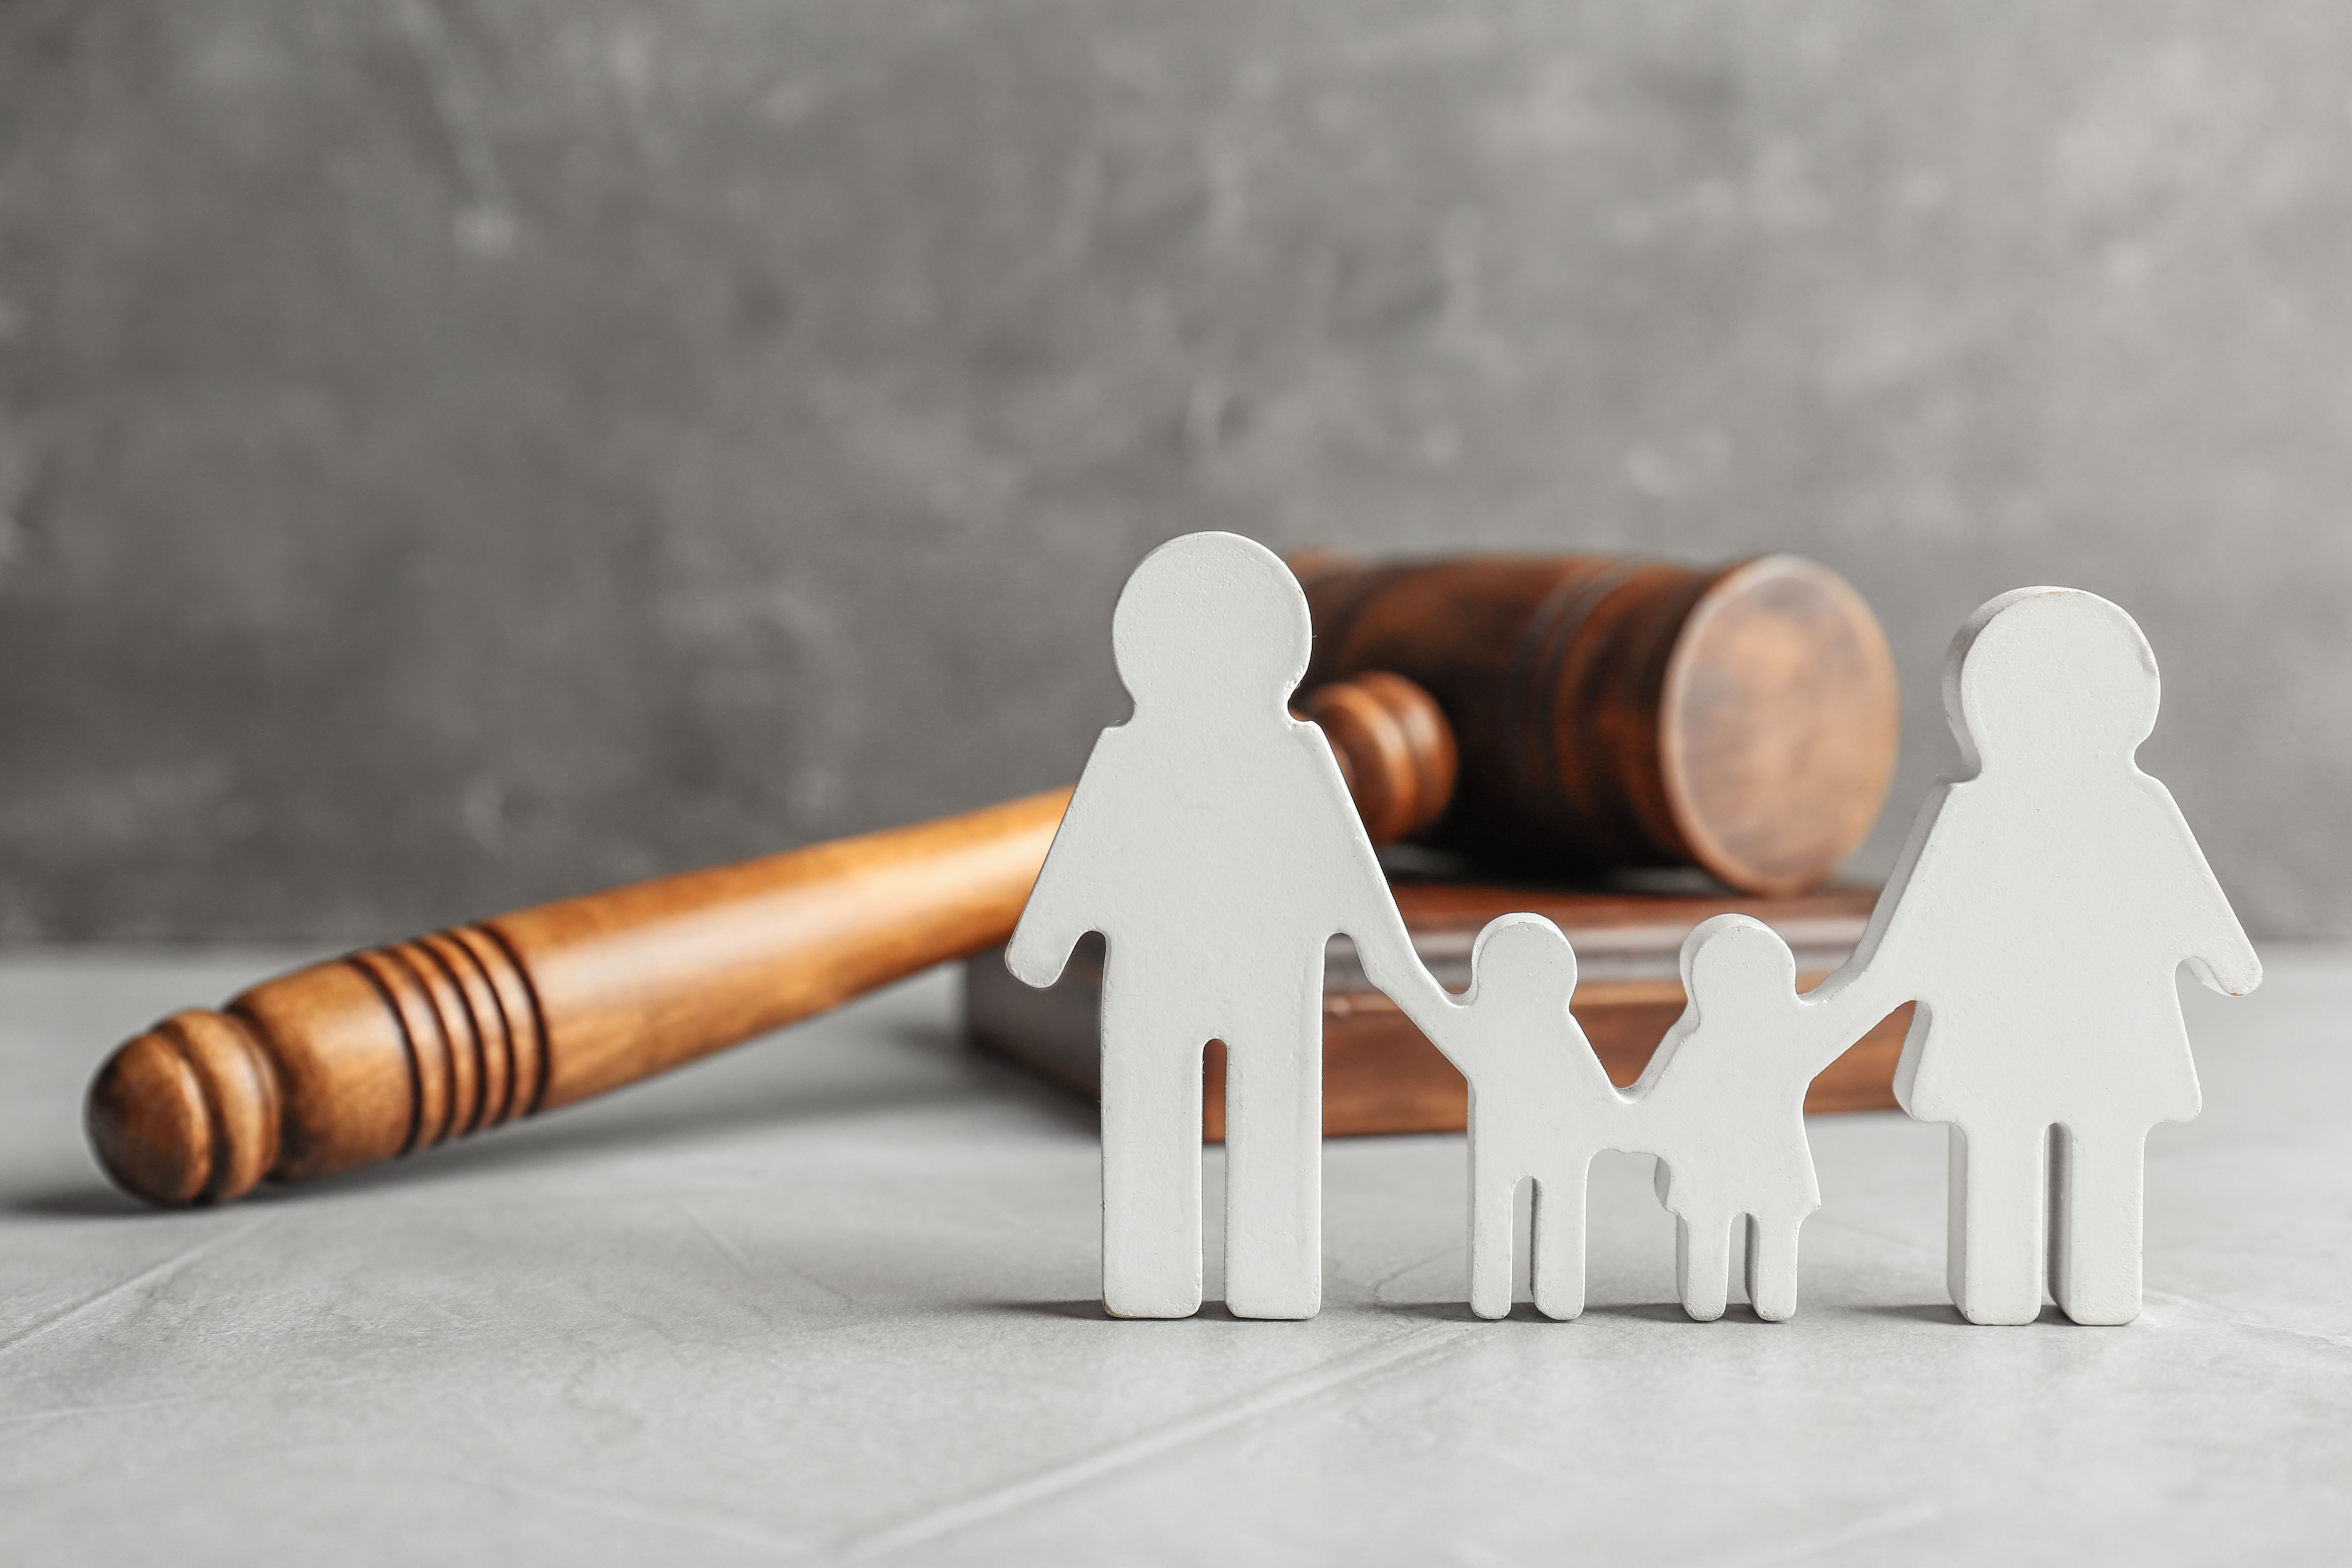 paper cut out of family on table in front of gavel